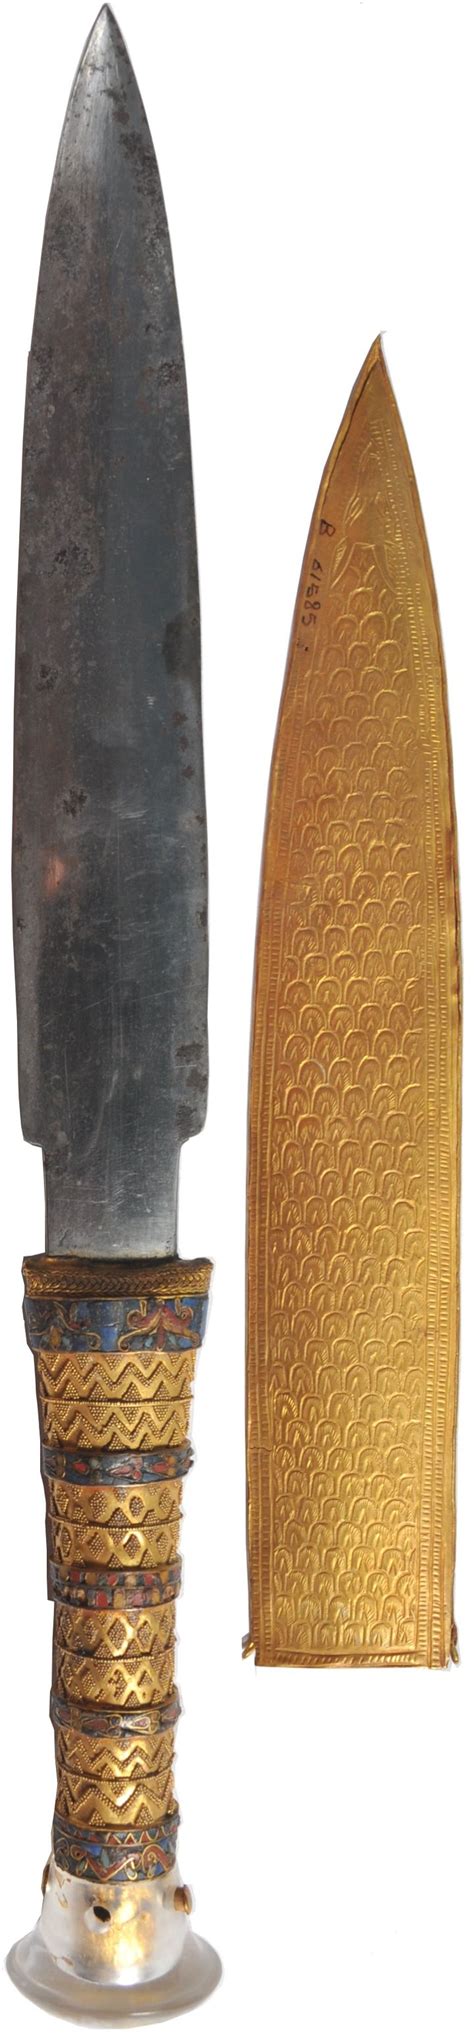 King Tuts Knife Was Made From A Meteorite Ancient Egypt Tutankhamun